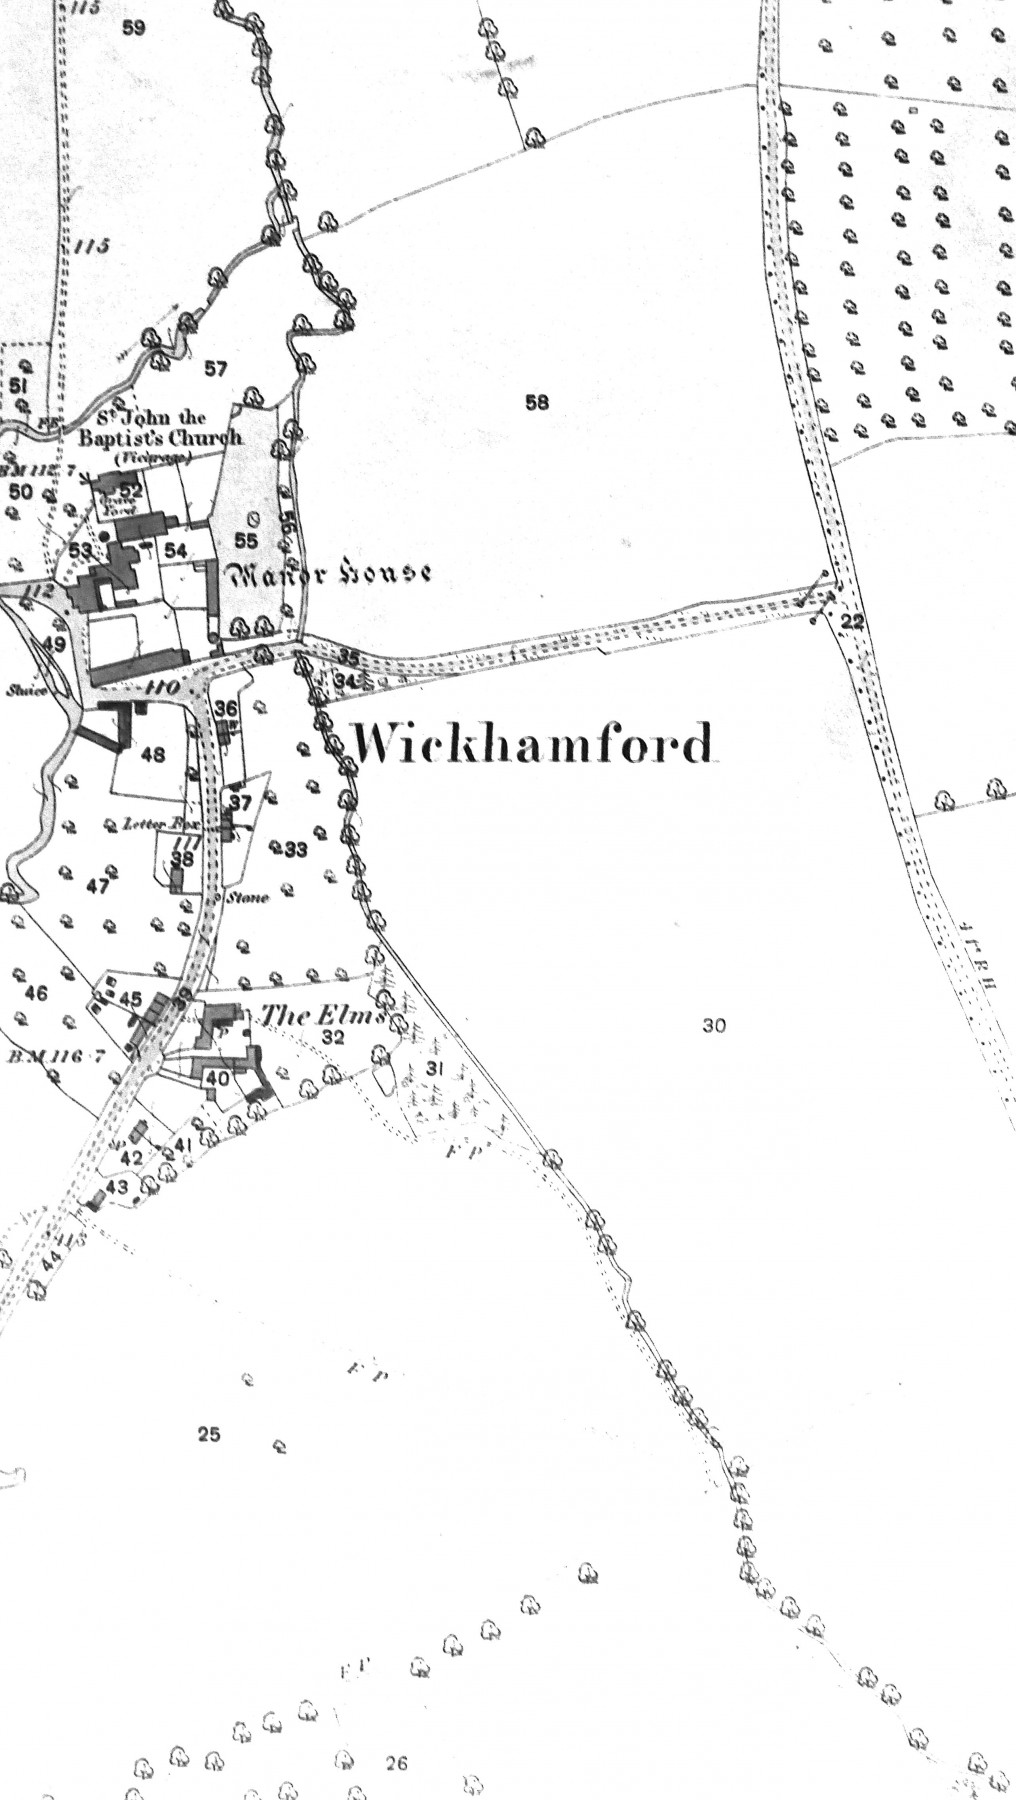 A detail showing the area around Wickhamford Manor